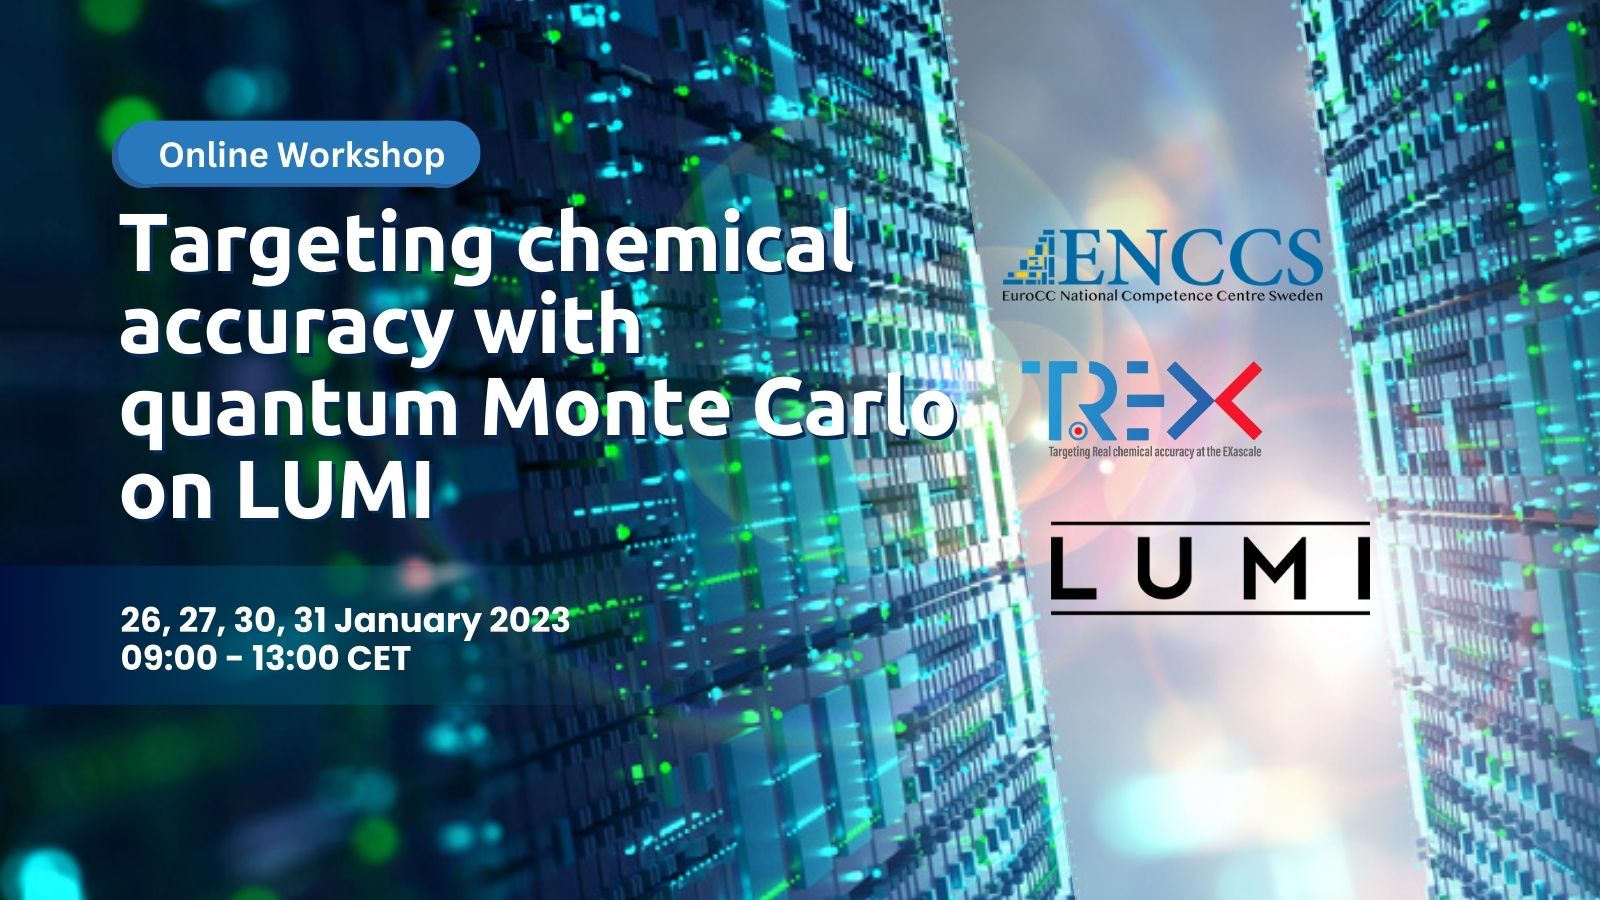 Targeting chemical accuracy with quantum Monte Carlo on LUMI